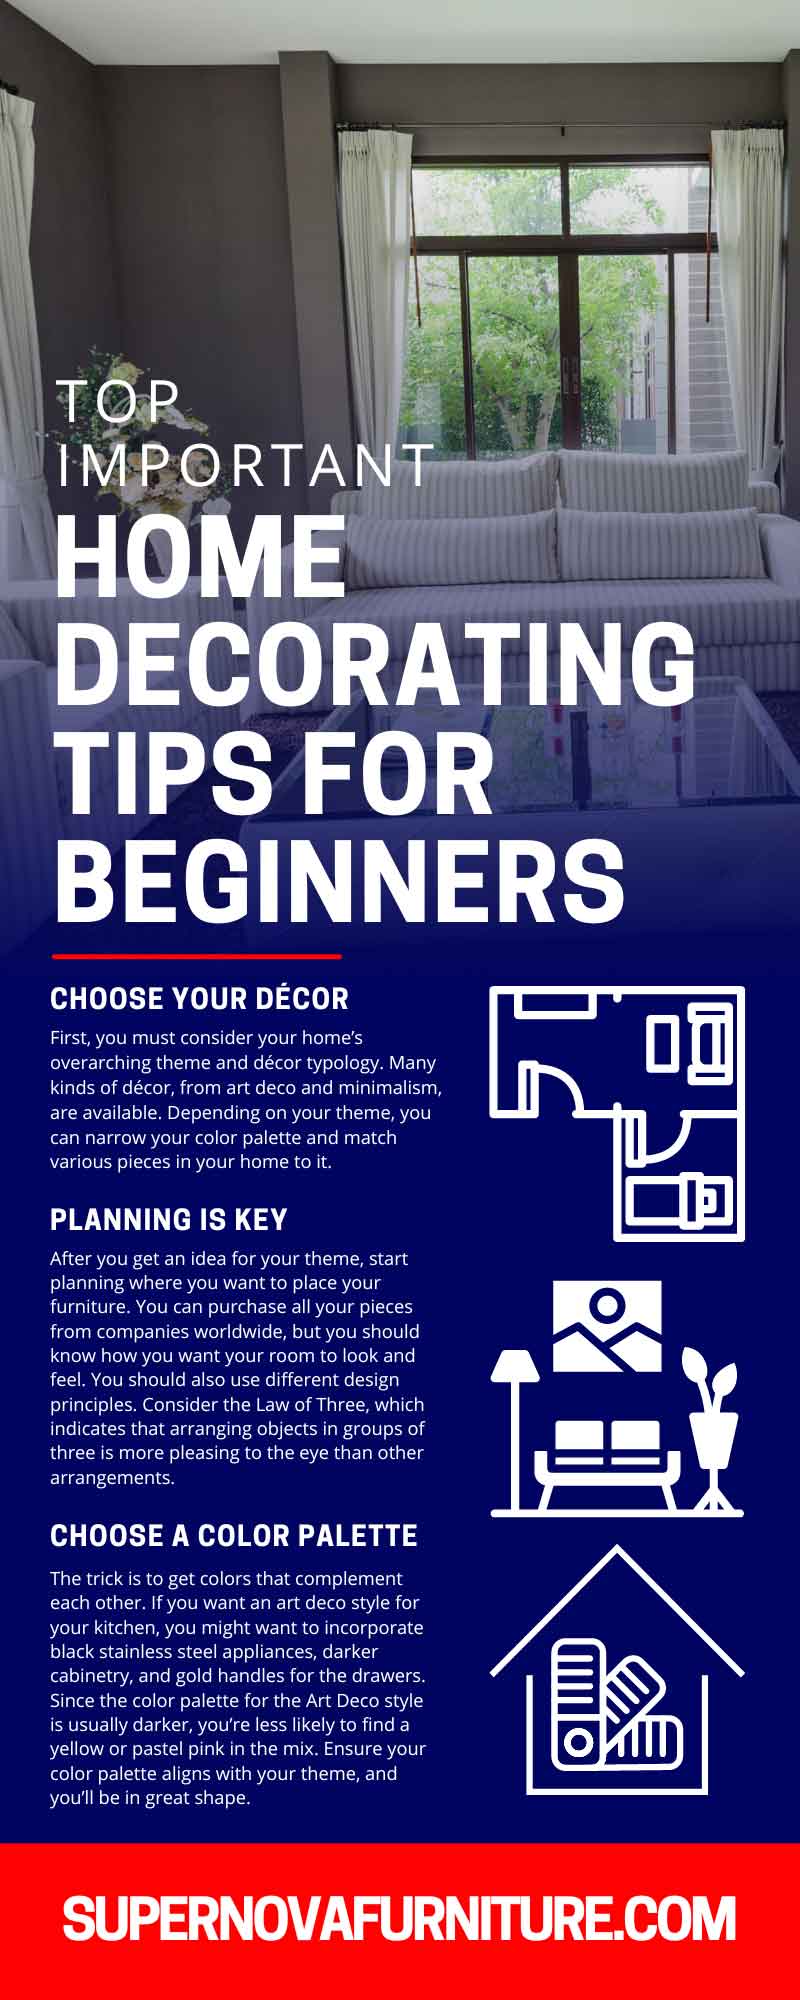 Top 9 Important Home Decorating Tips for Beginners